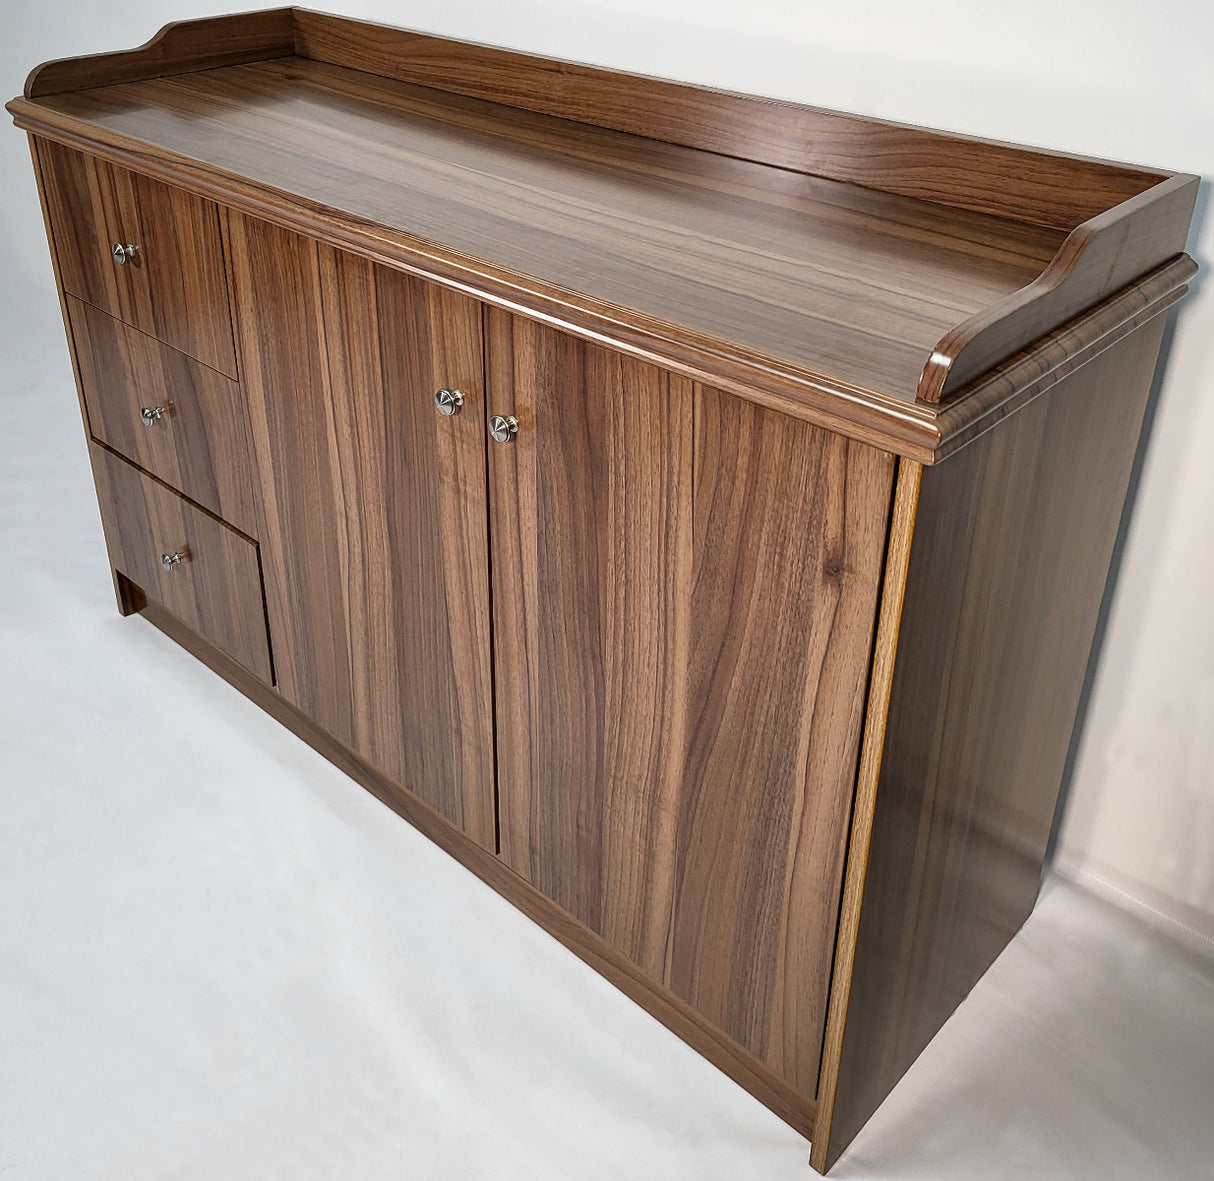 120cm Wide Light Oak Cupboard with Integrated Drawers - 2K01